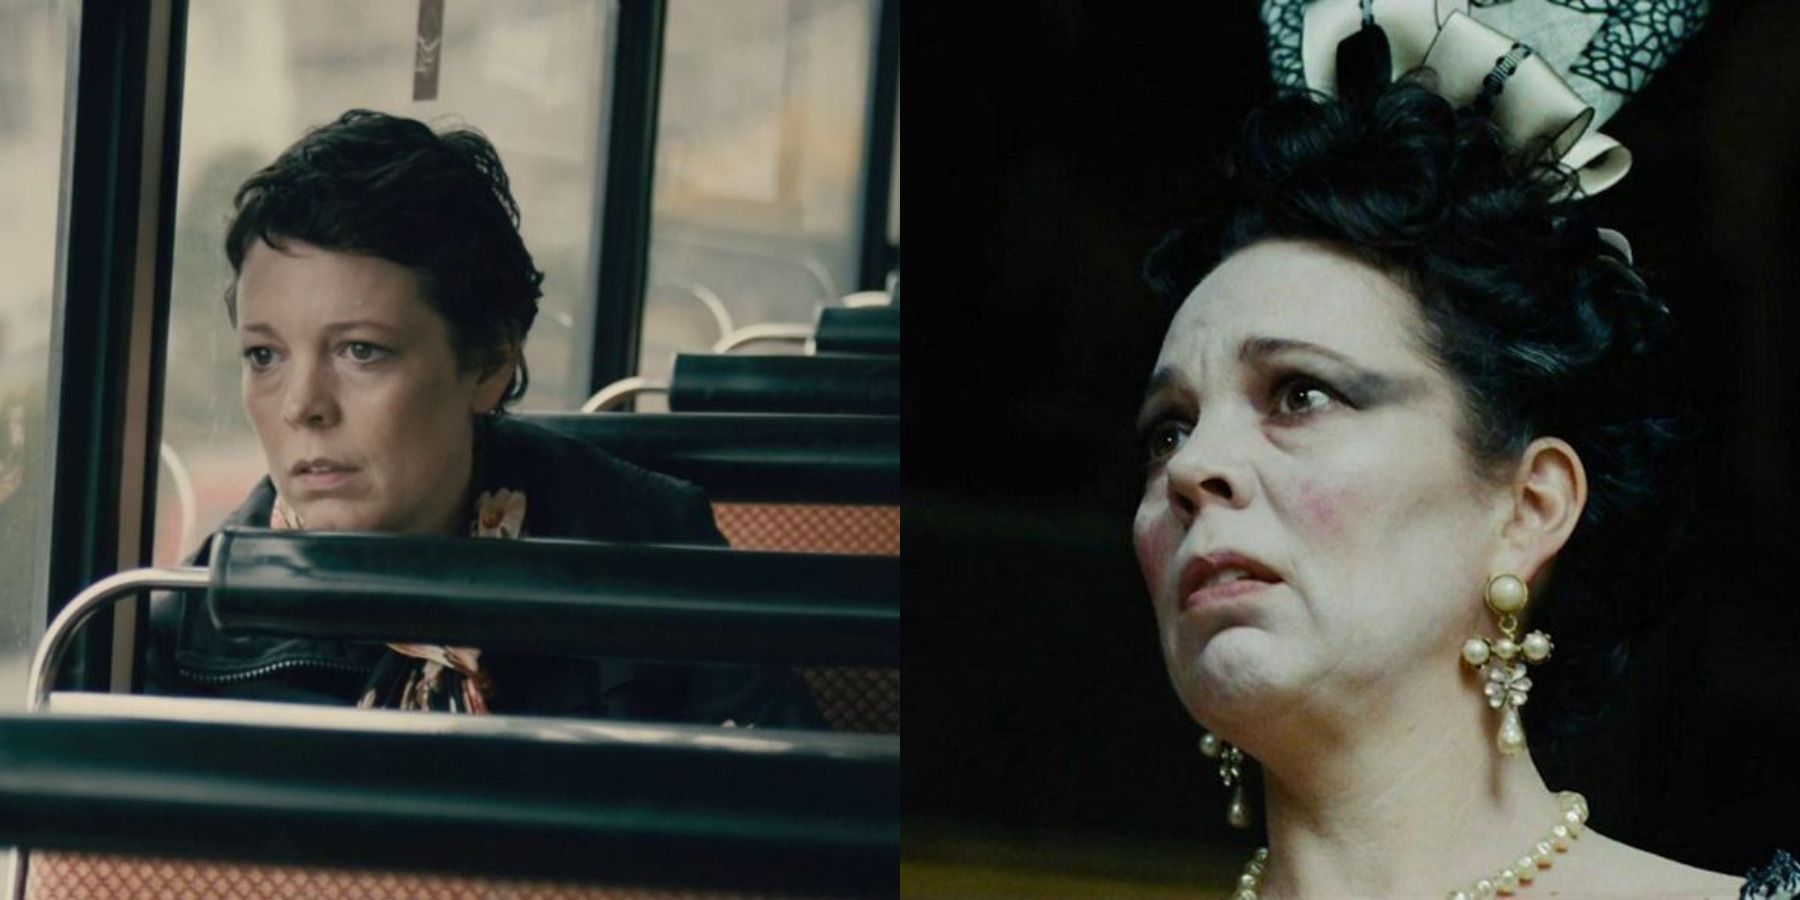 Olivia Colman best movies feature split image Tyrannosaur and The Favourite